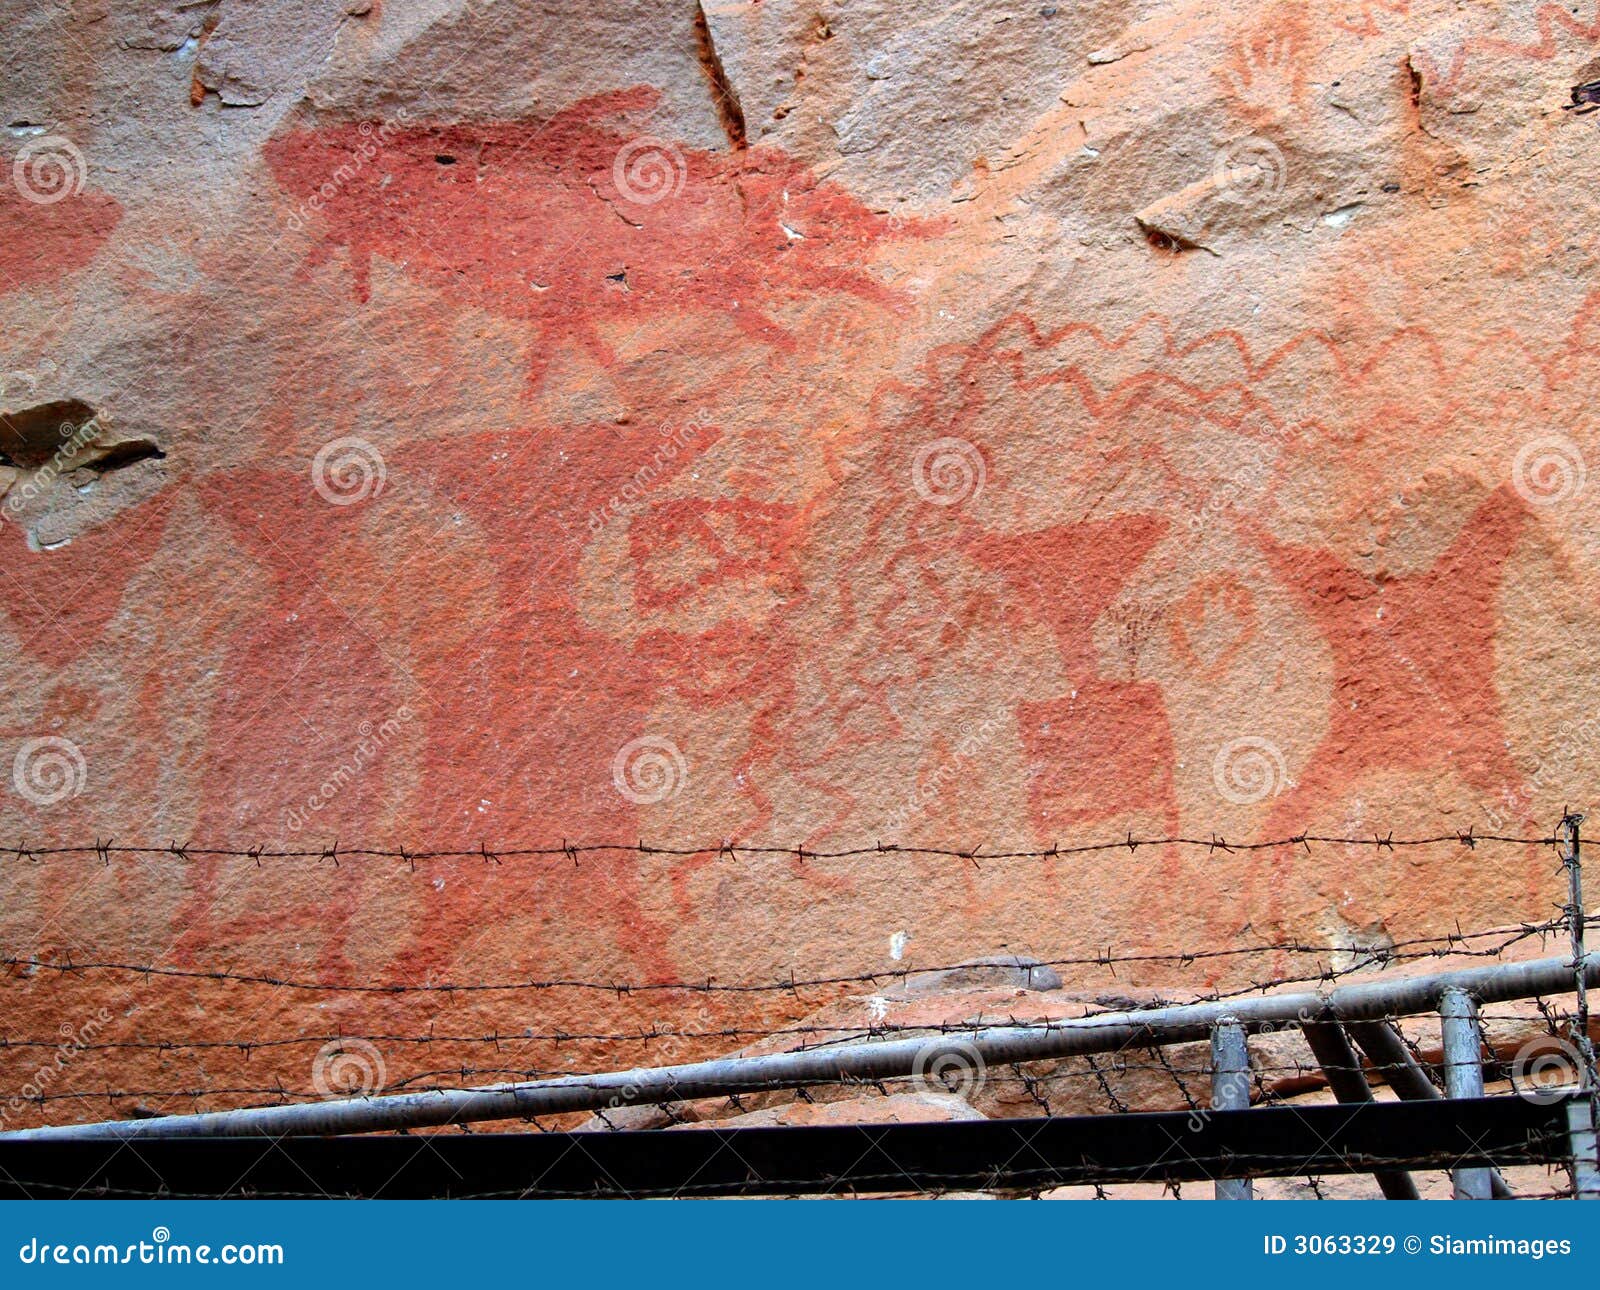 history pictograph 01